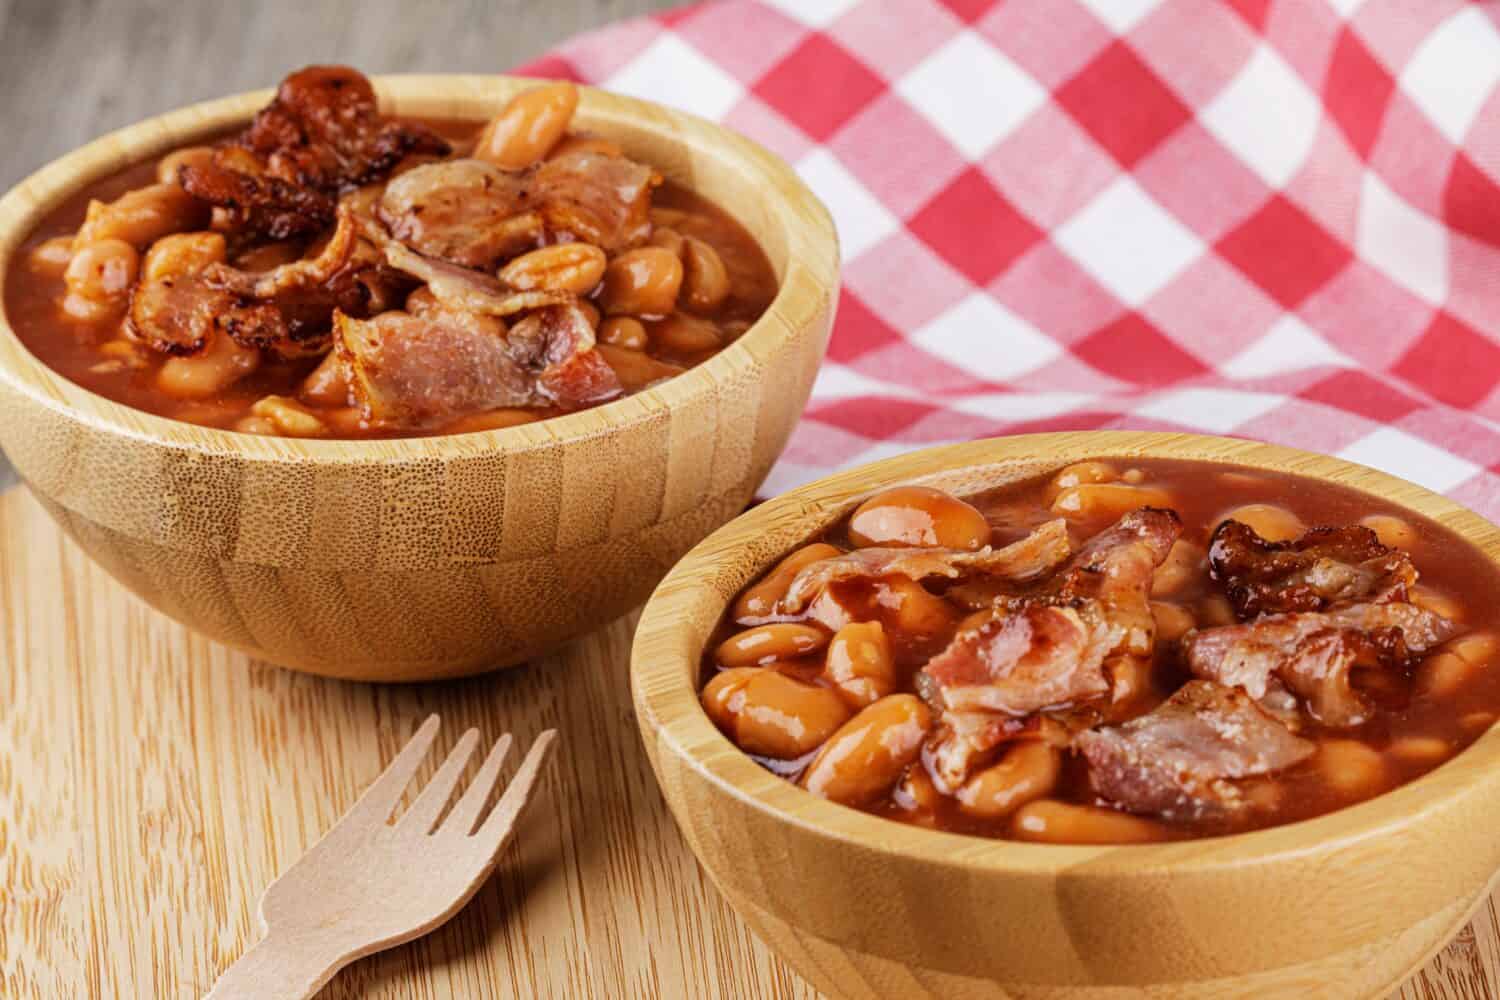 A wooden bowl of Baked Beans also known as Pork Beans on a wooden background with copy space